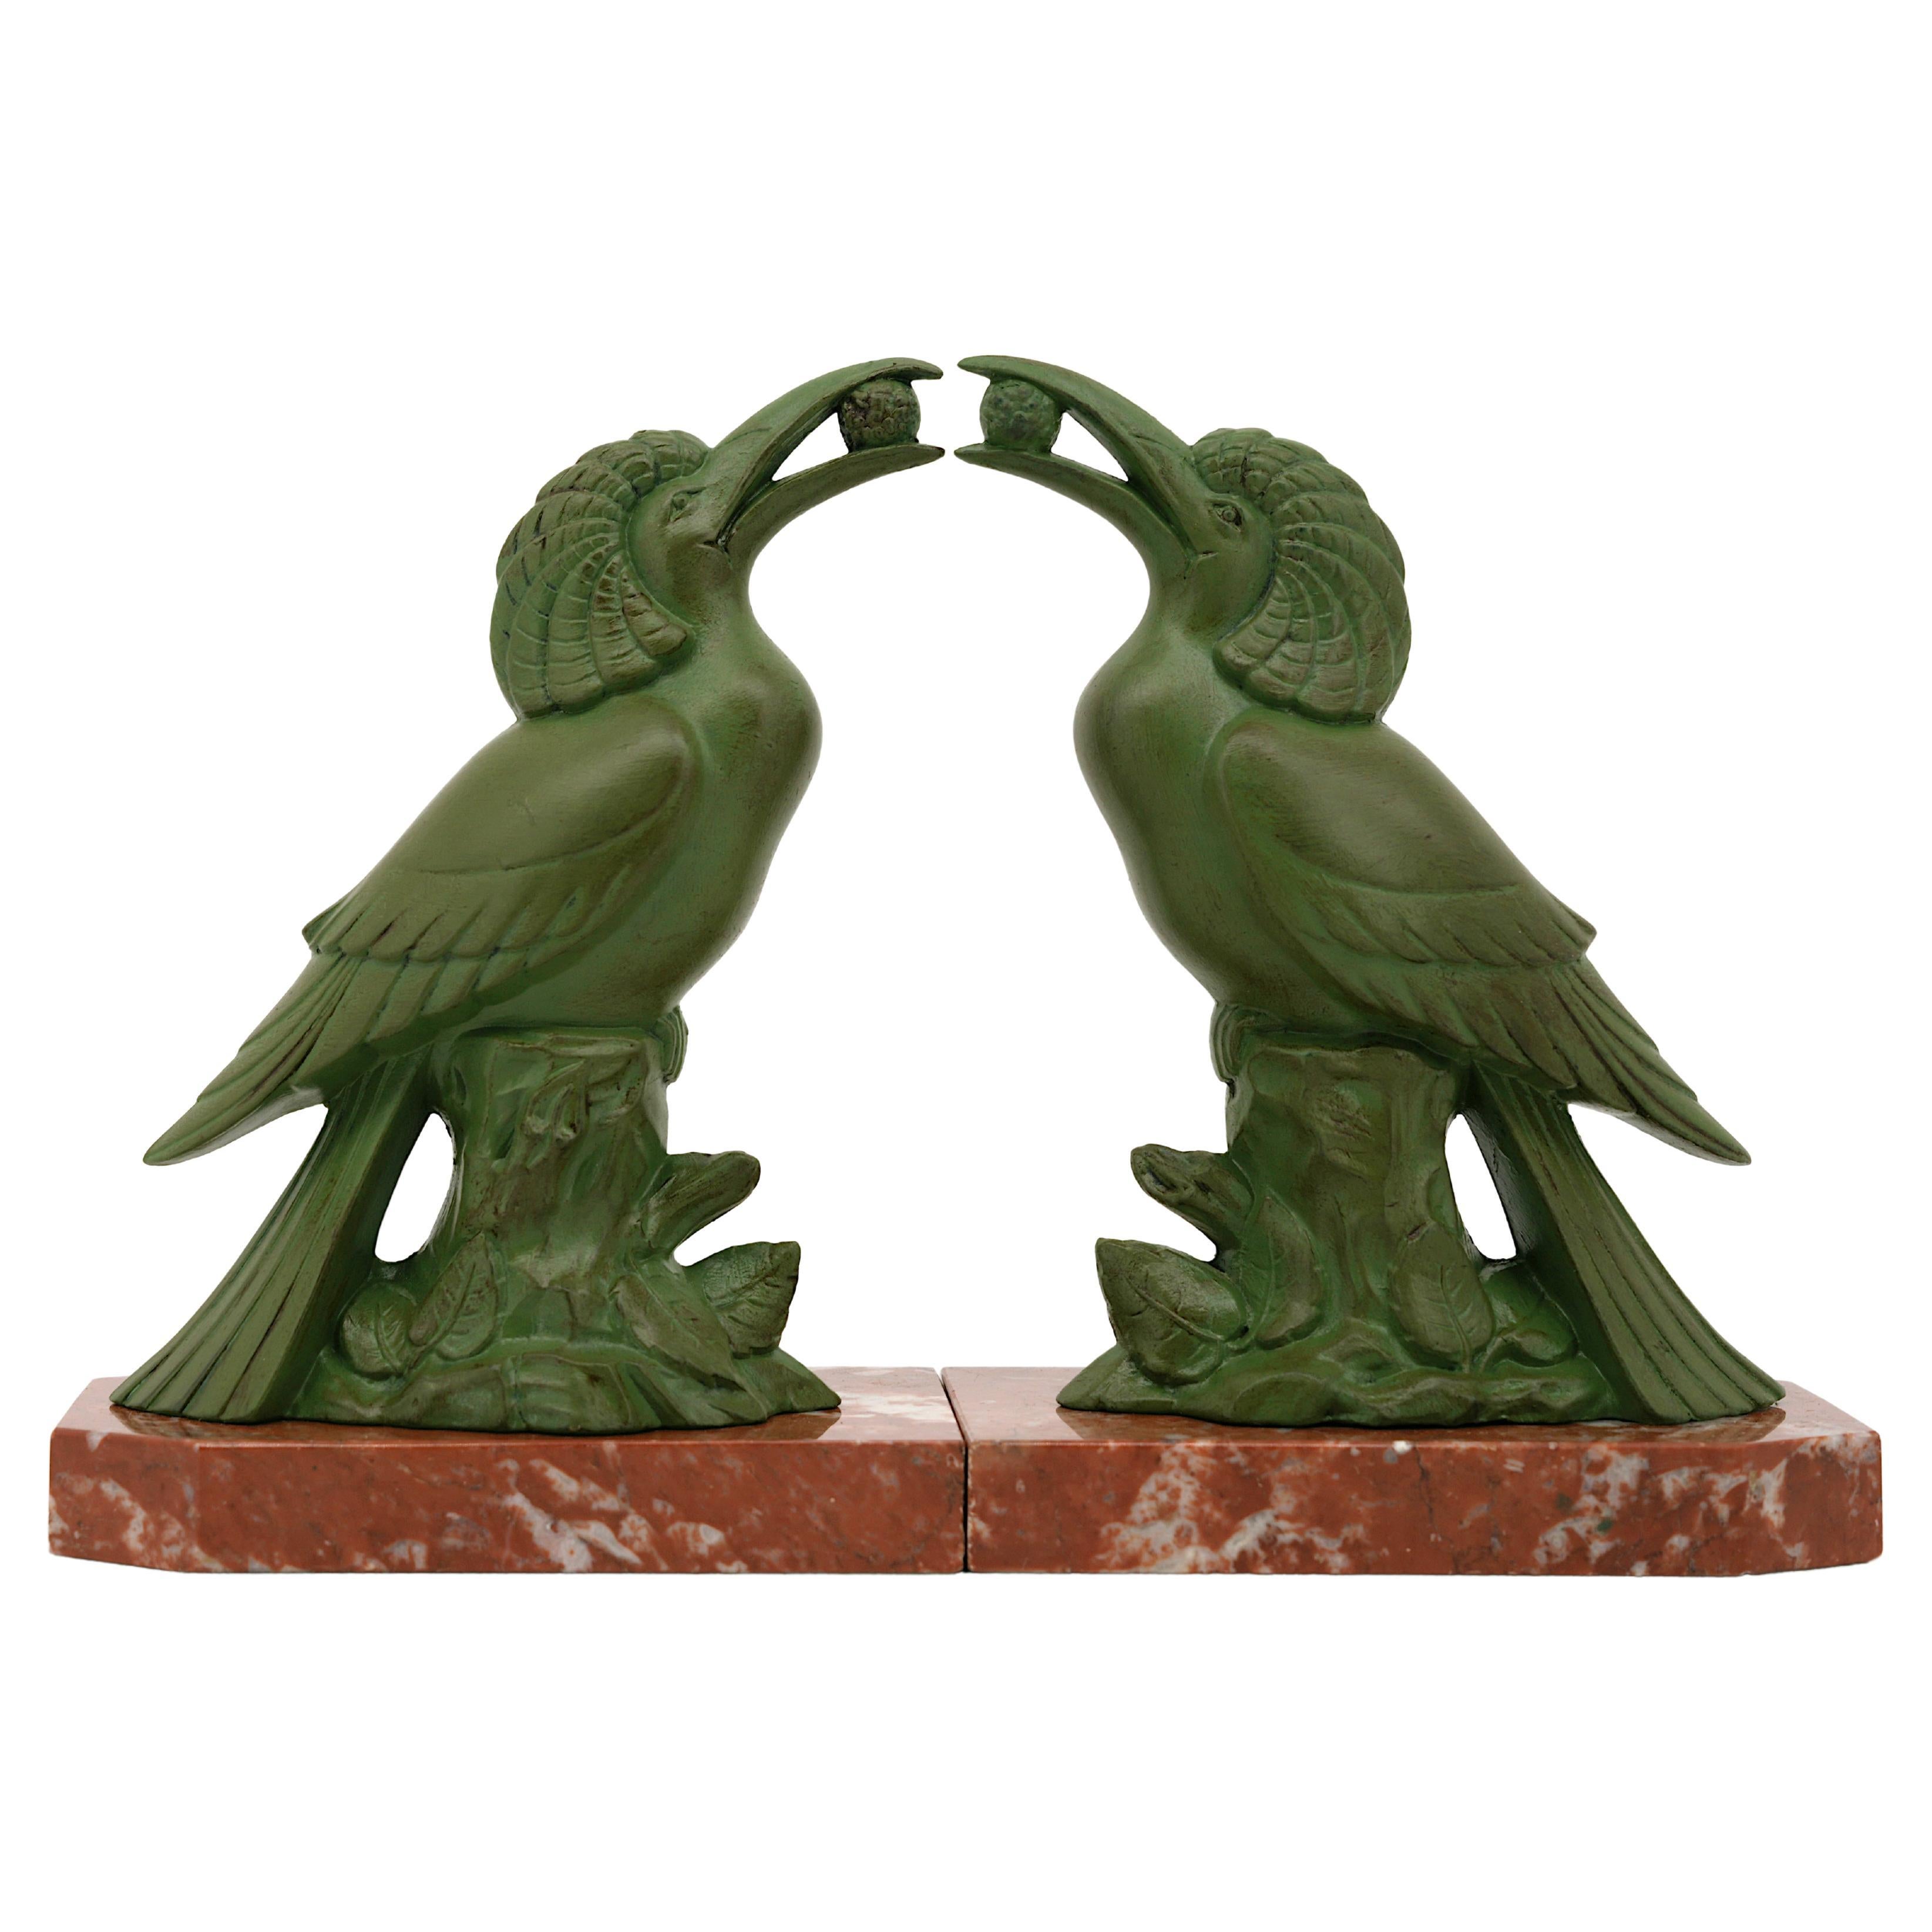 French Art Deco Birds Bookends, 1930s